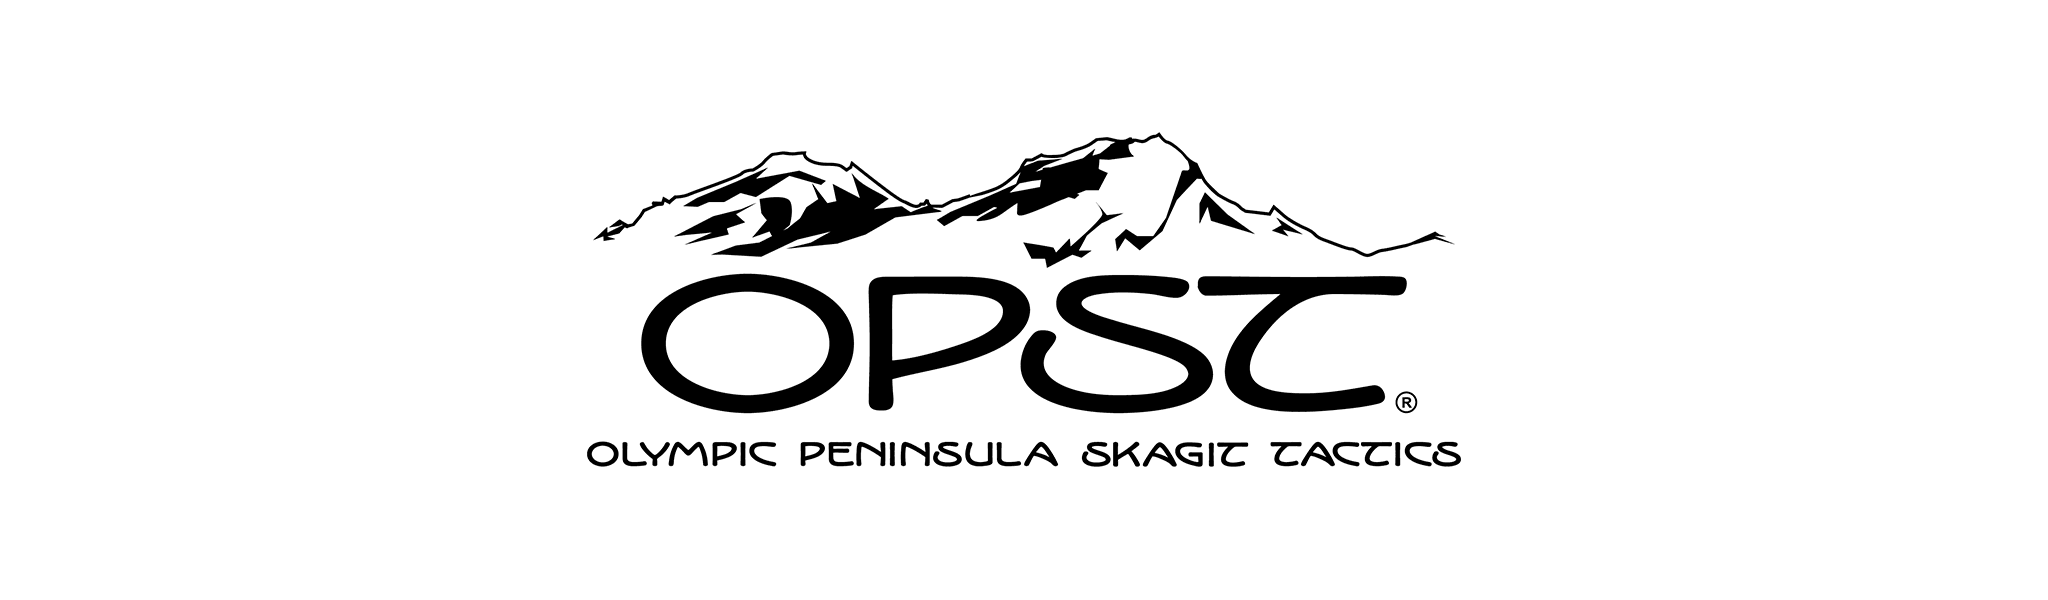 OPST Two-Handed Rods – OLYMPIC PENINSULA SKAGIT TACTICS